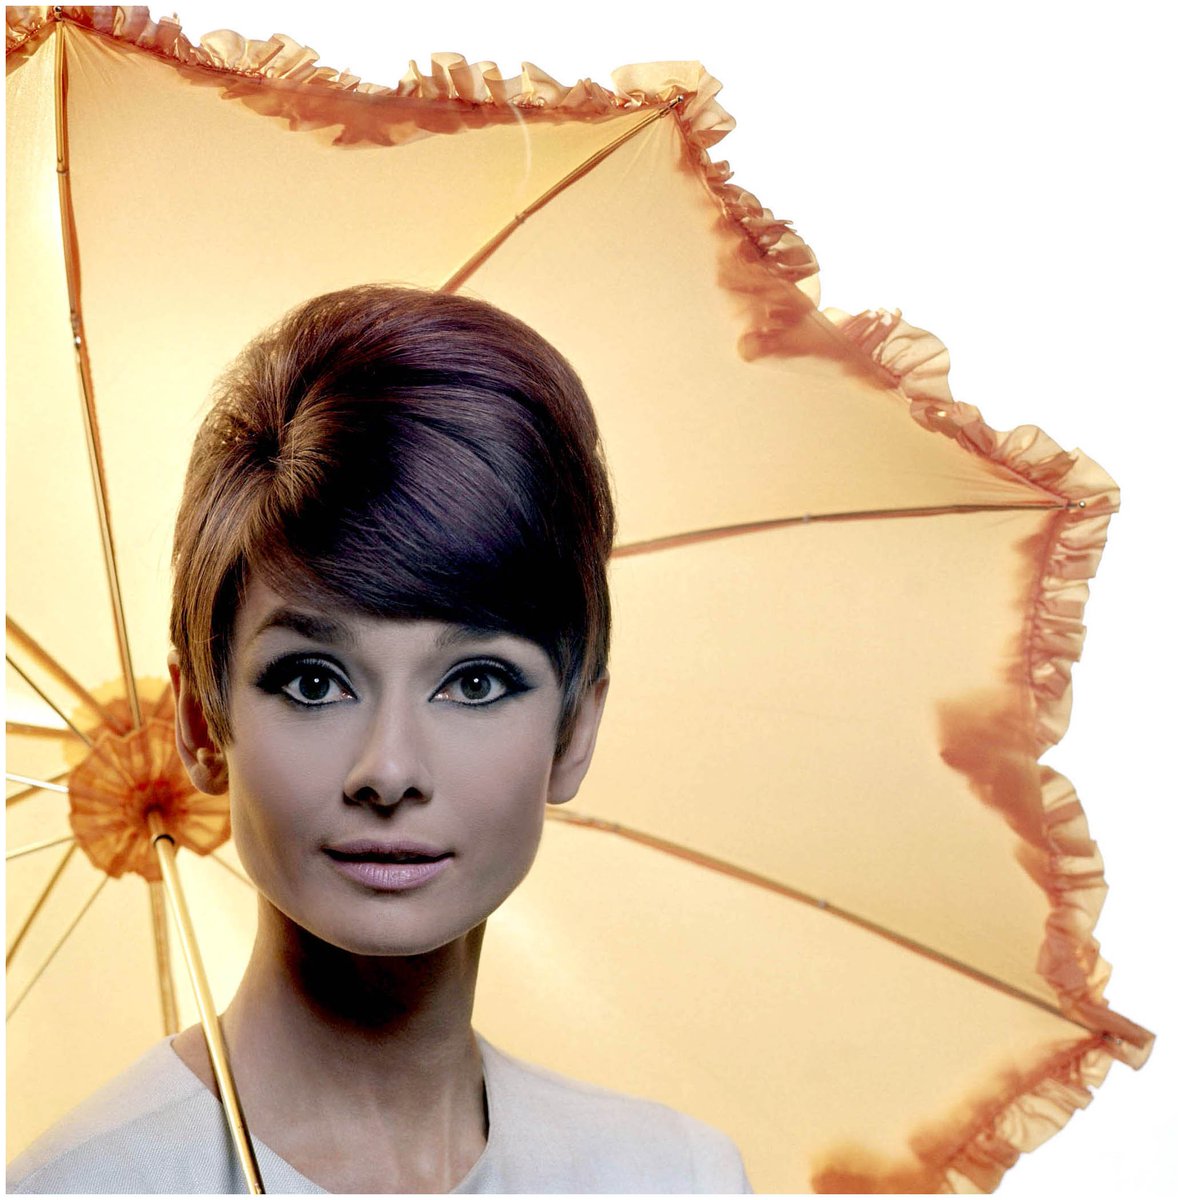 Audrey Hepburn photographed by Douglas Kirkland for How to Steal a Million, 1965